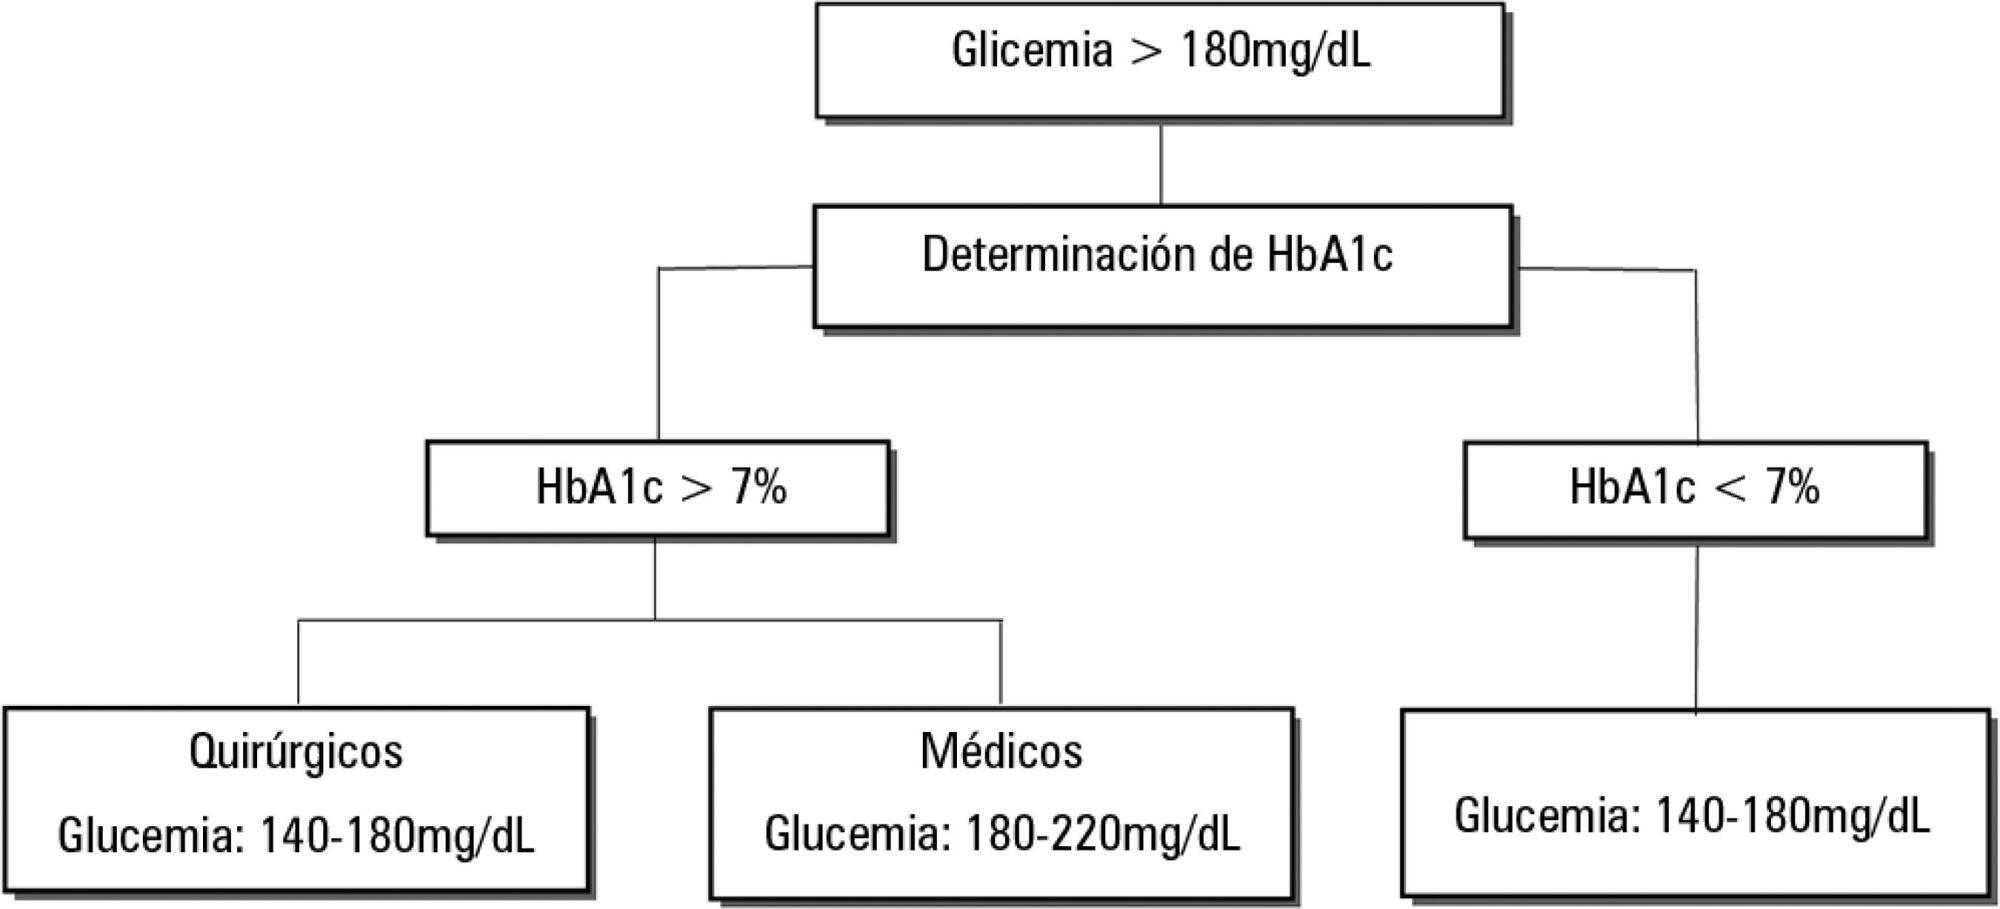 Dysglycemia in the critically ill patient: current evidence and future perspectives